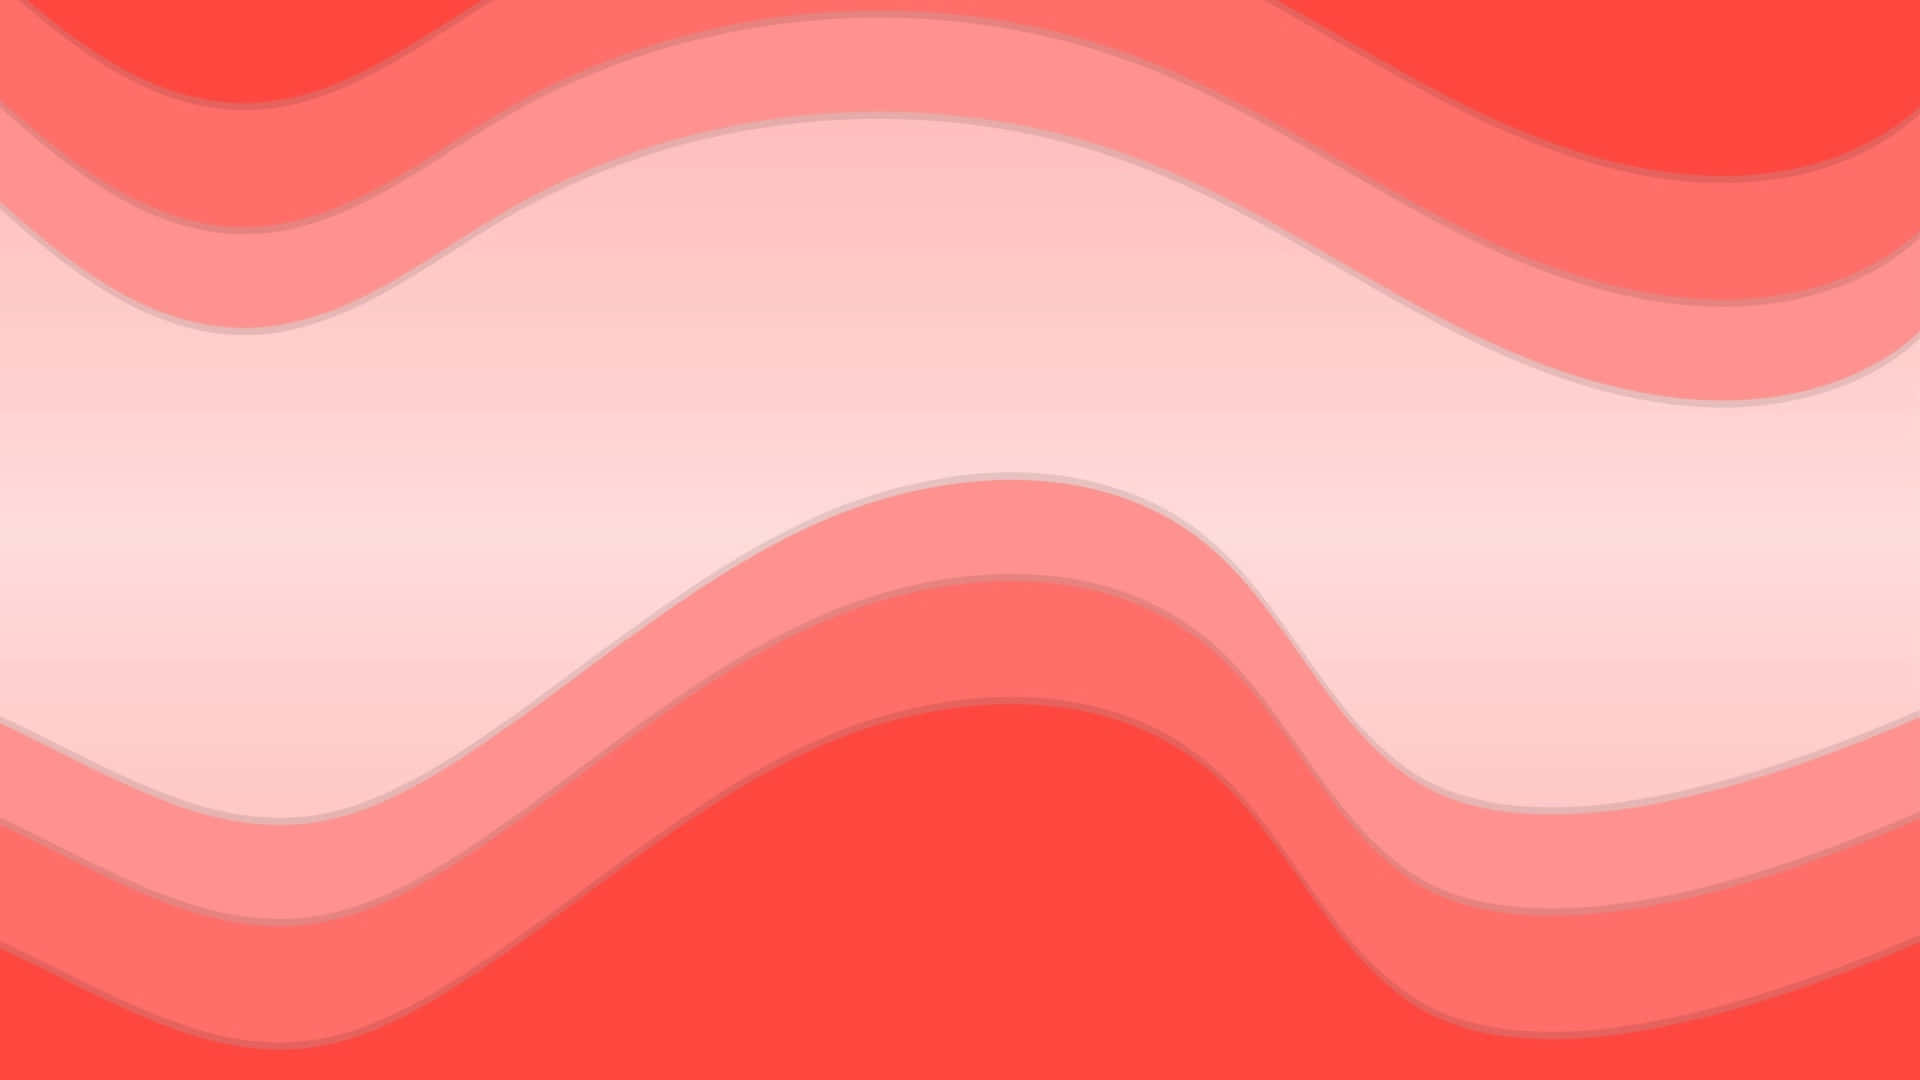 A Pink And White Wavy Background